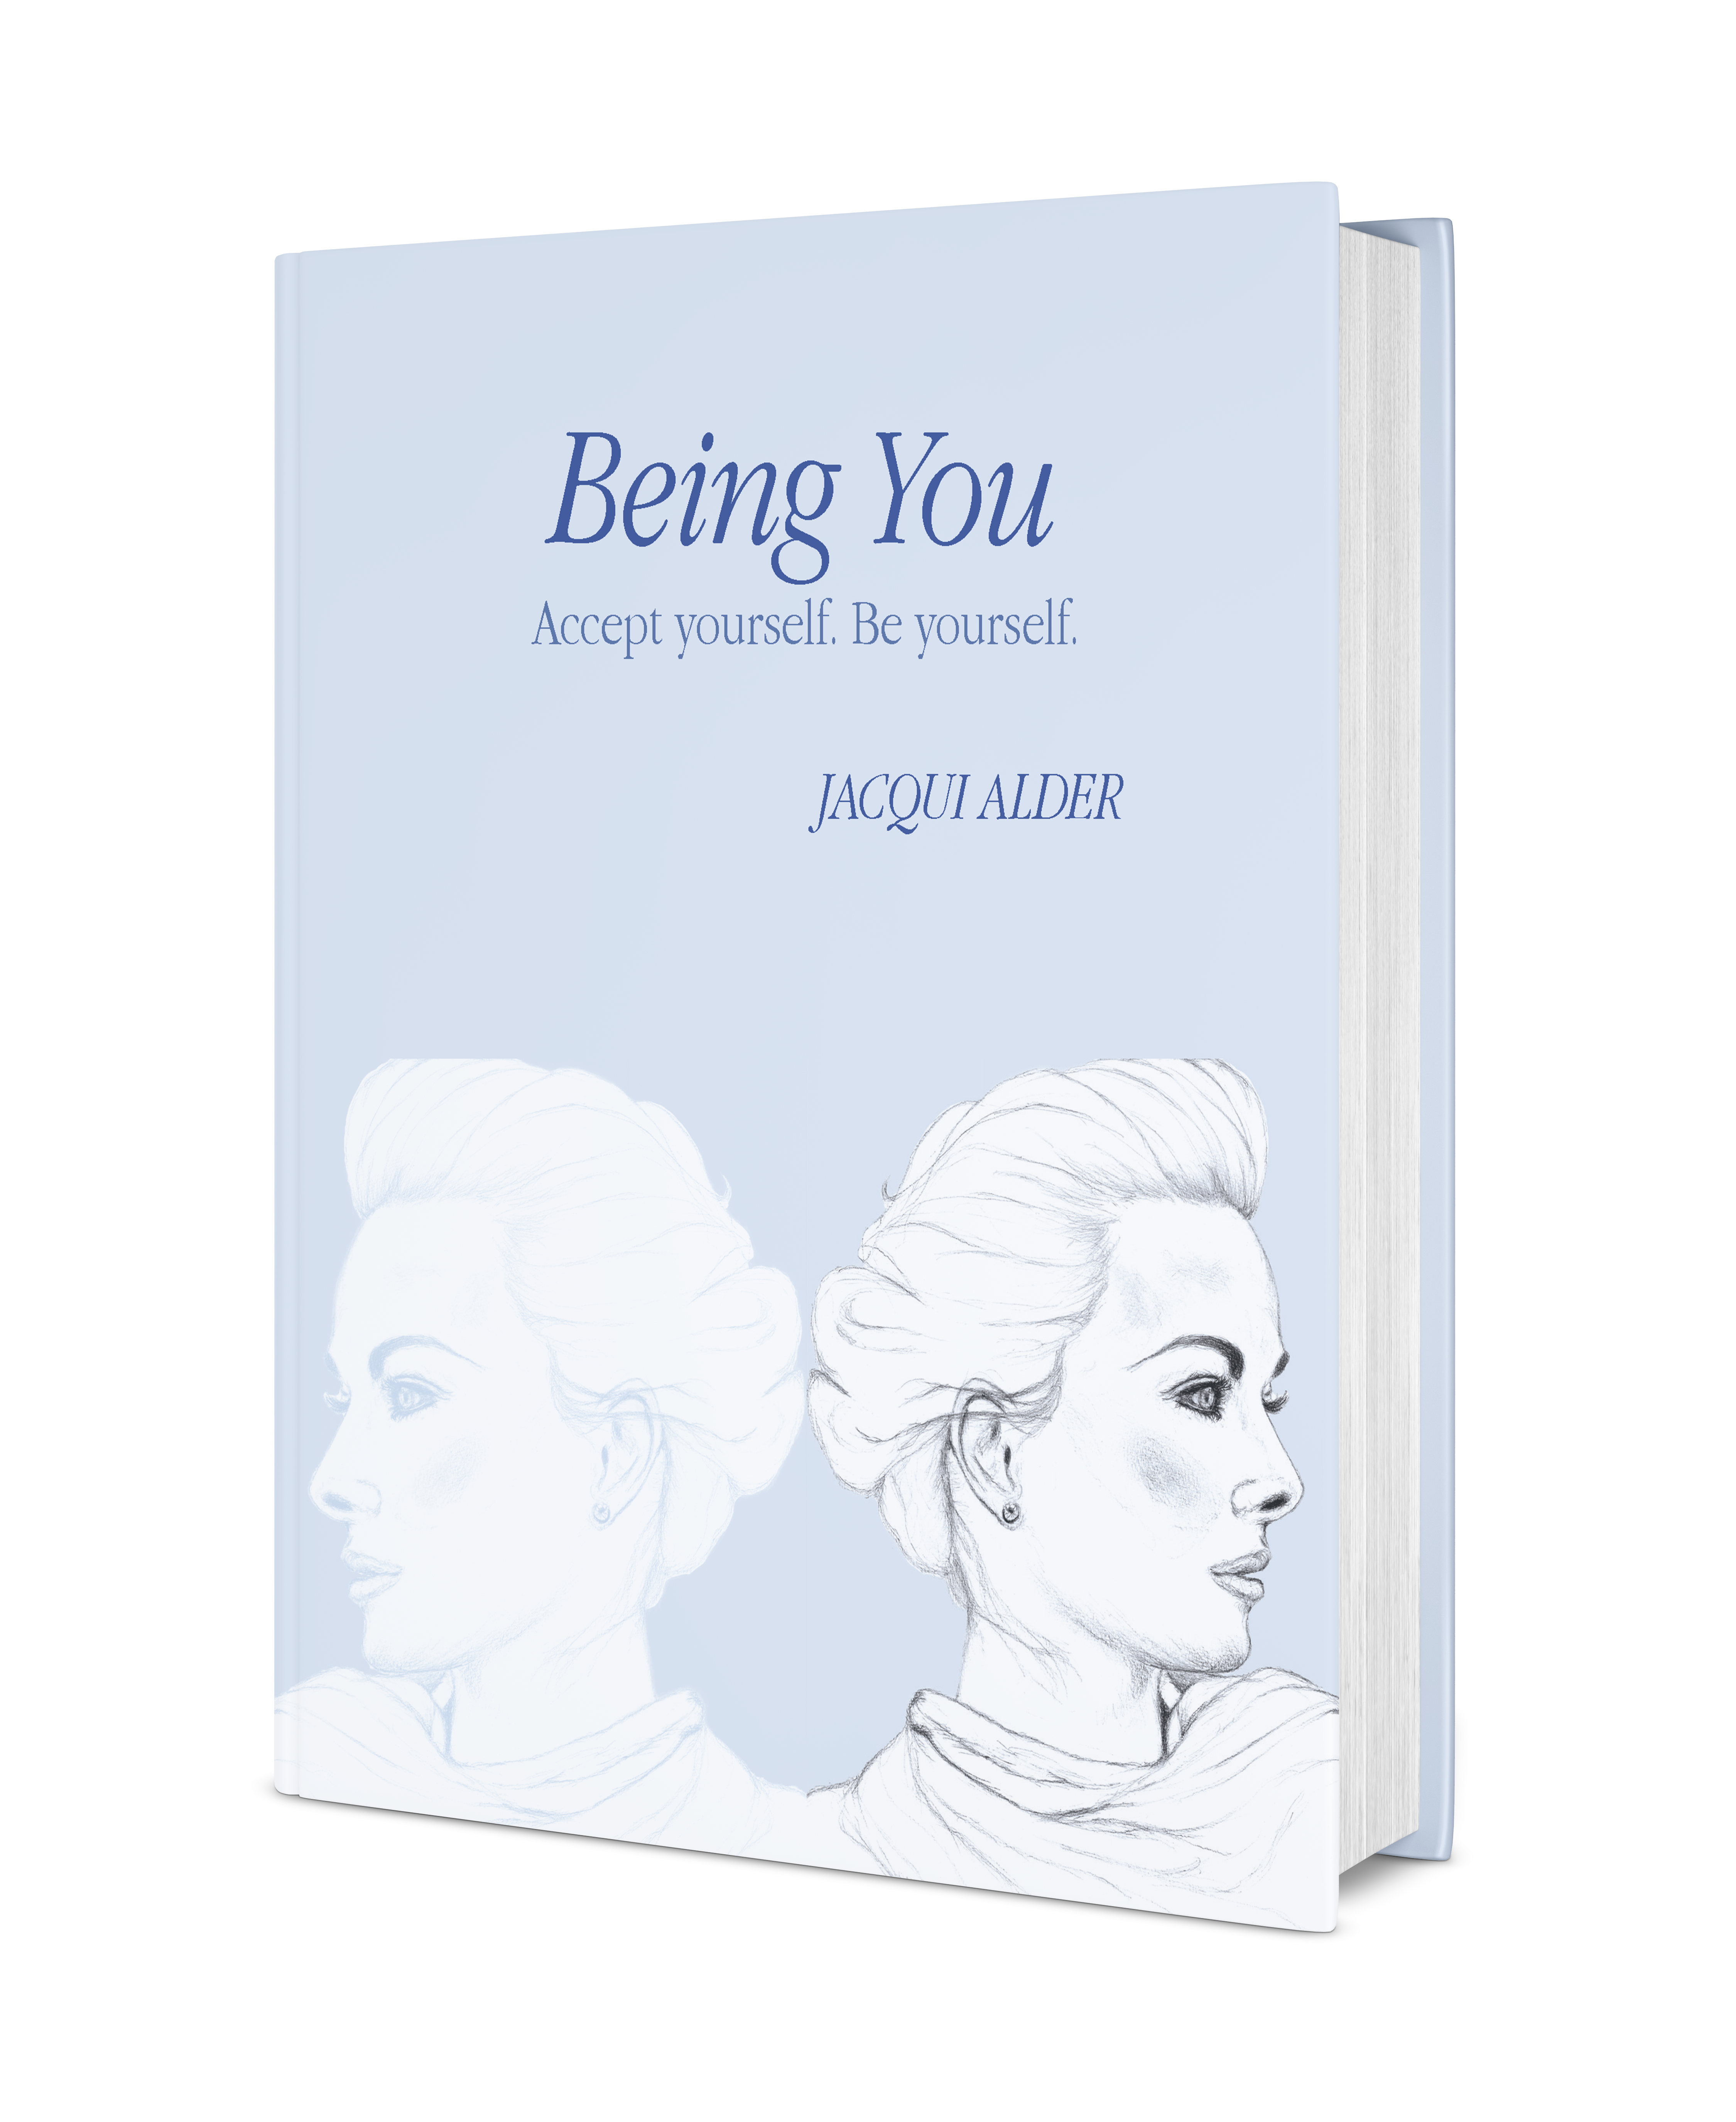 Being You - Clarity Simplicity Success